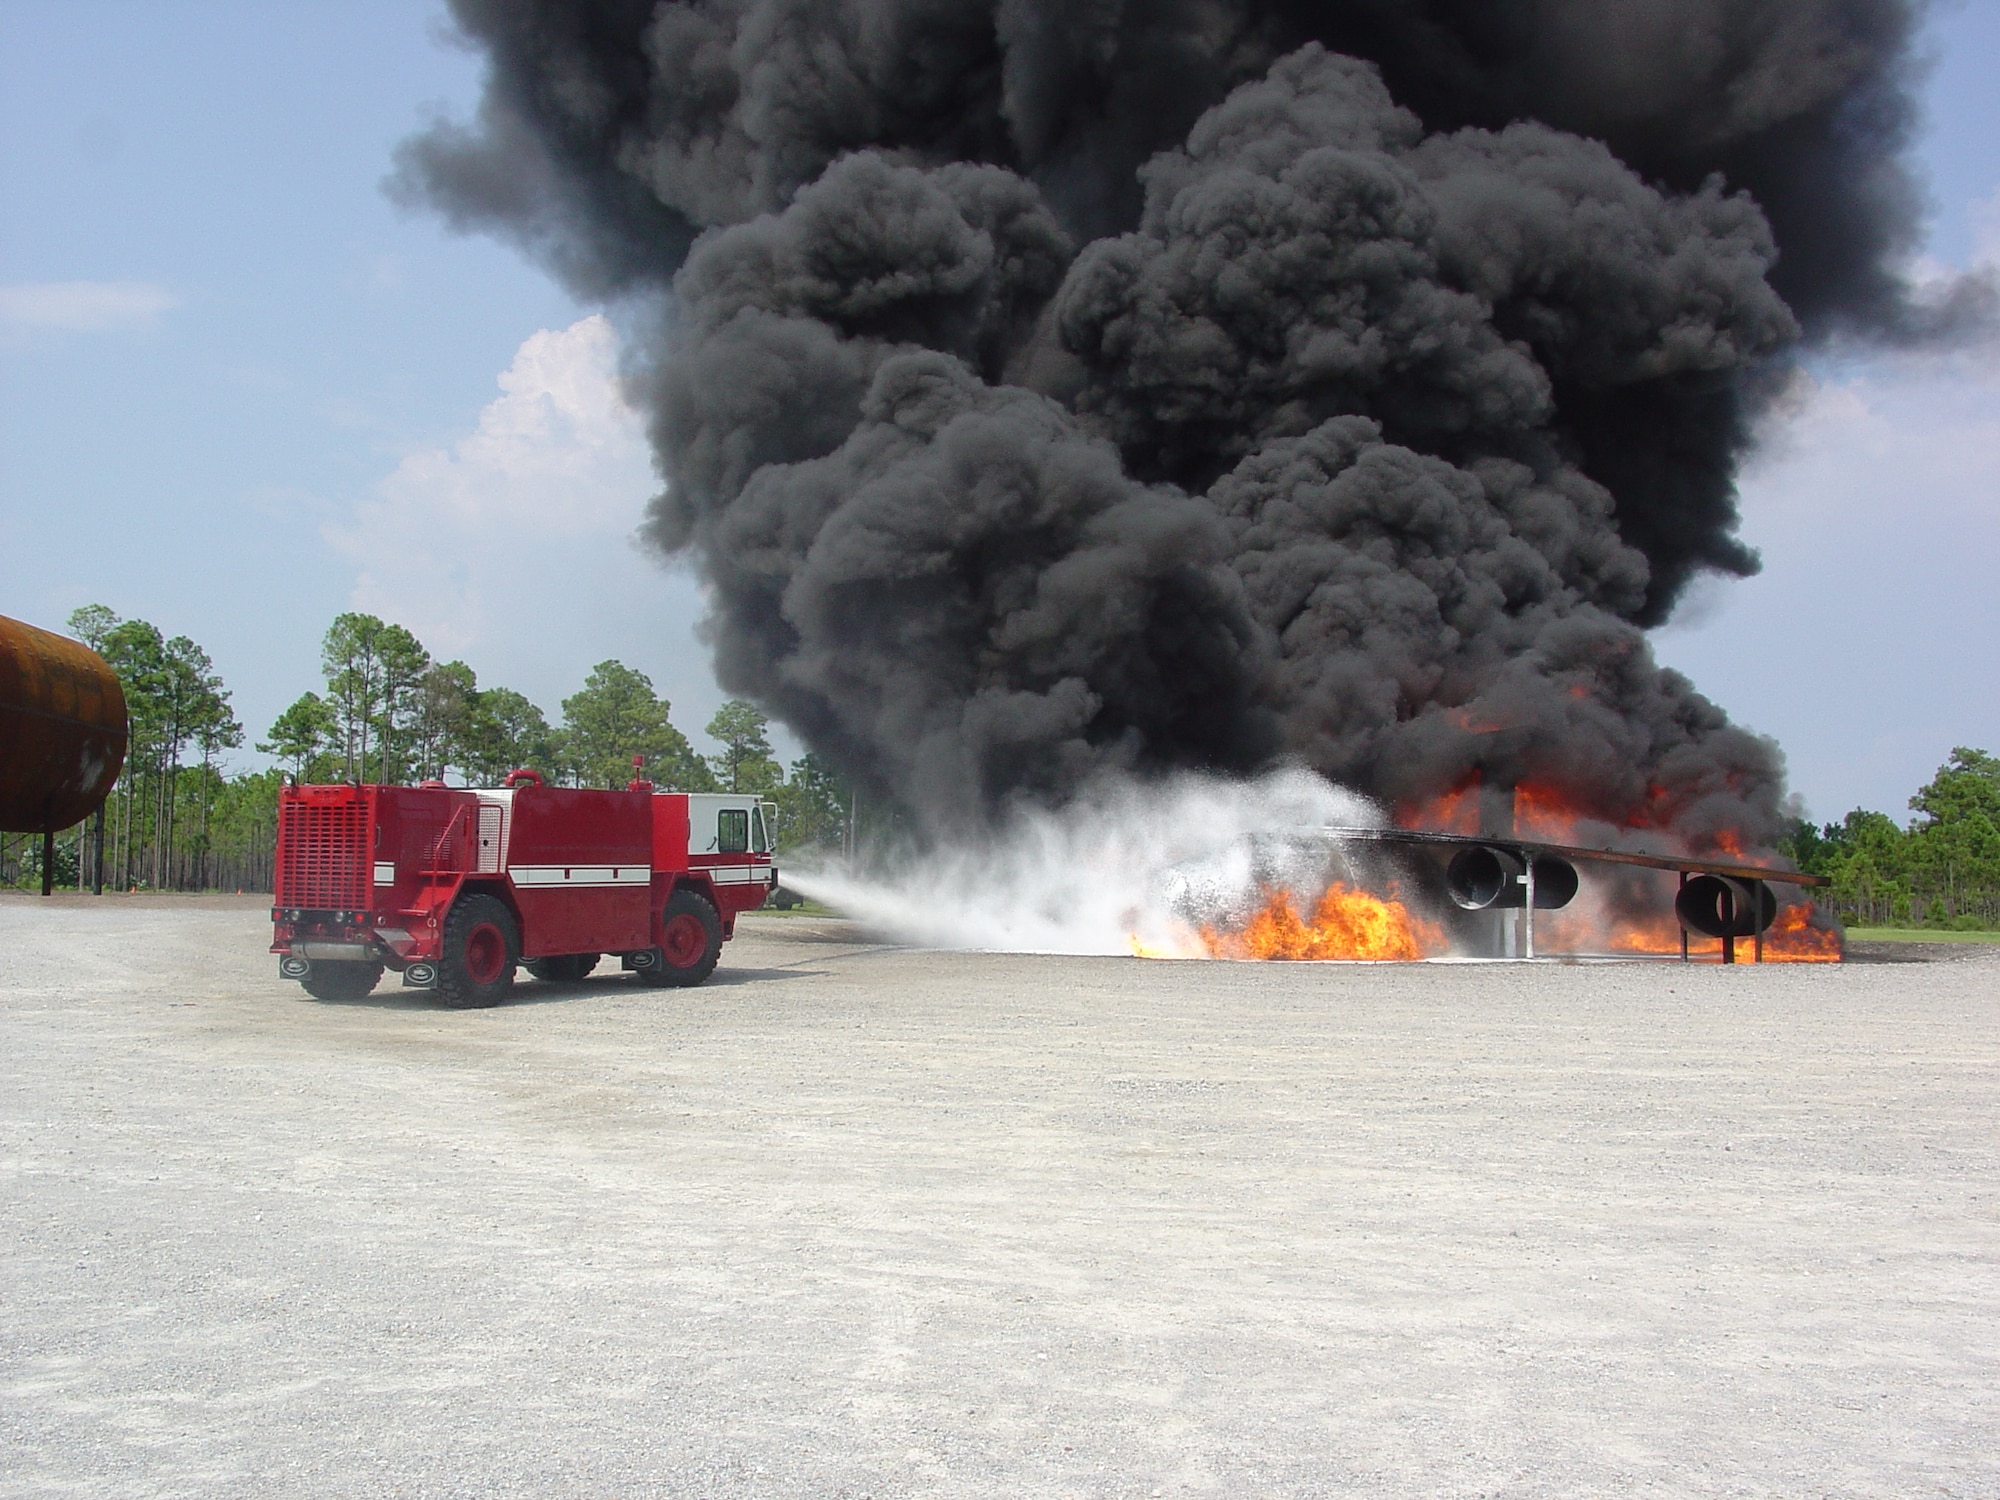 Air Force Research Laboratory has developed ultra high pressure firefighting technology that yields greater fire fighting capability from smaller, light-weight vehicles.  Here the UHP P-19 truck extinguishes a fire during testing at Tyndall Air Force Base, Fla. (U.S. Air Force photo)